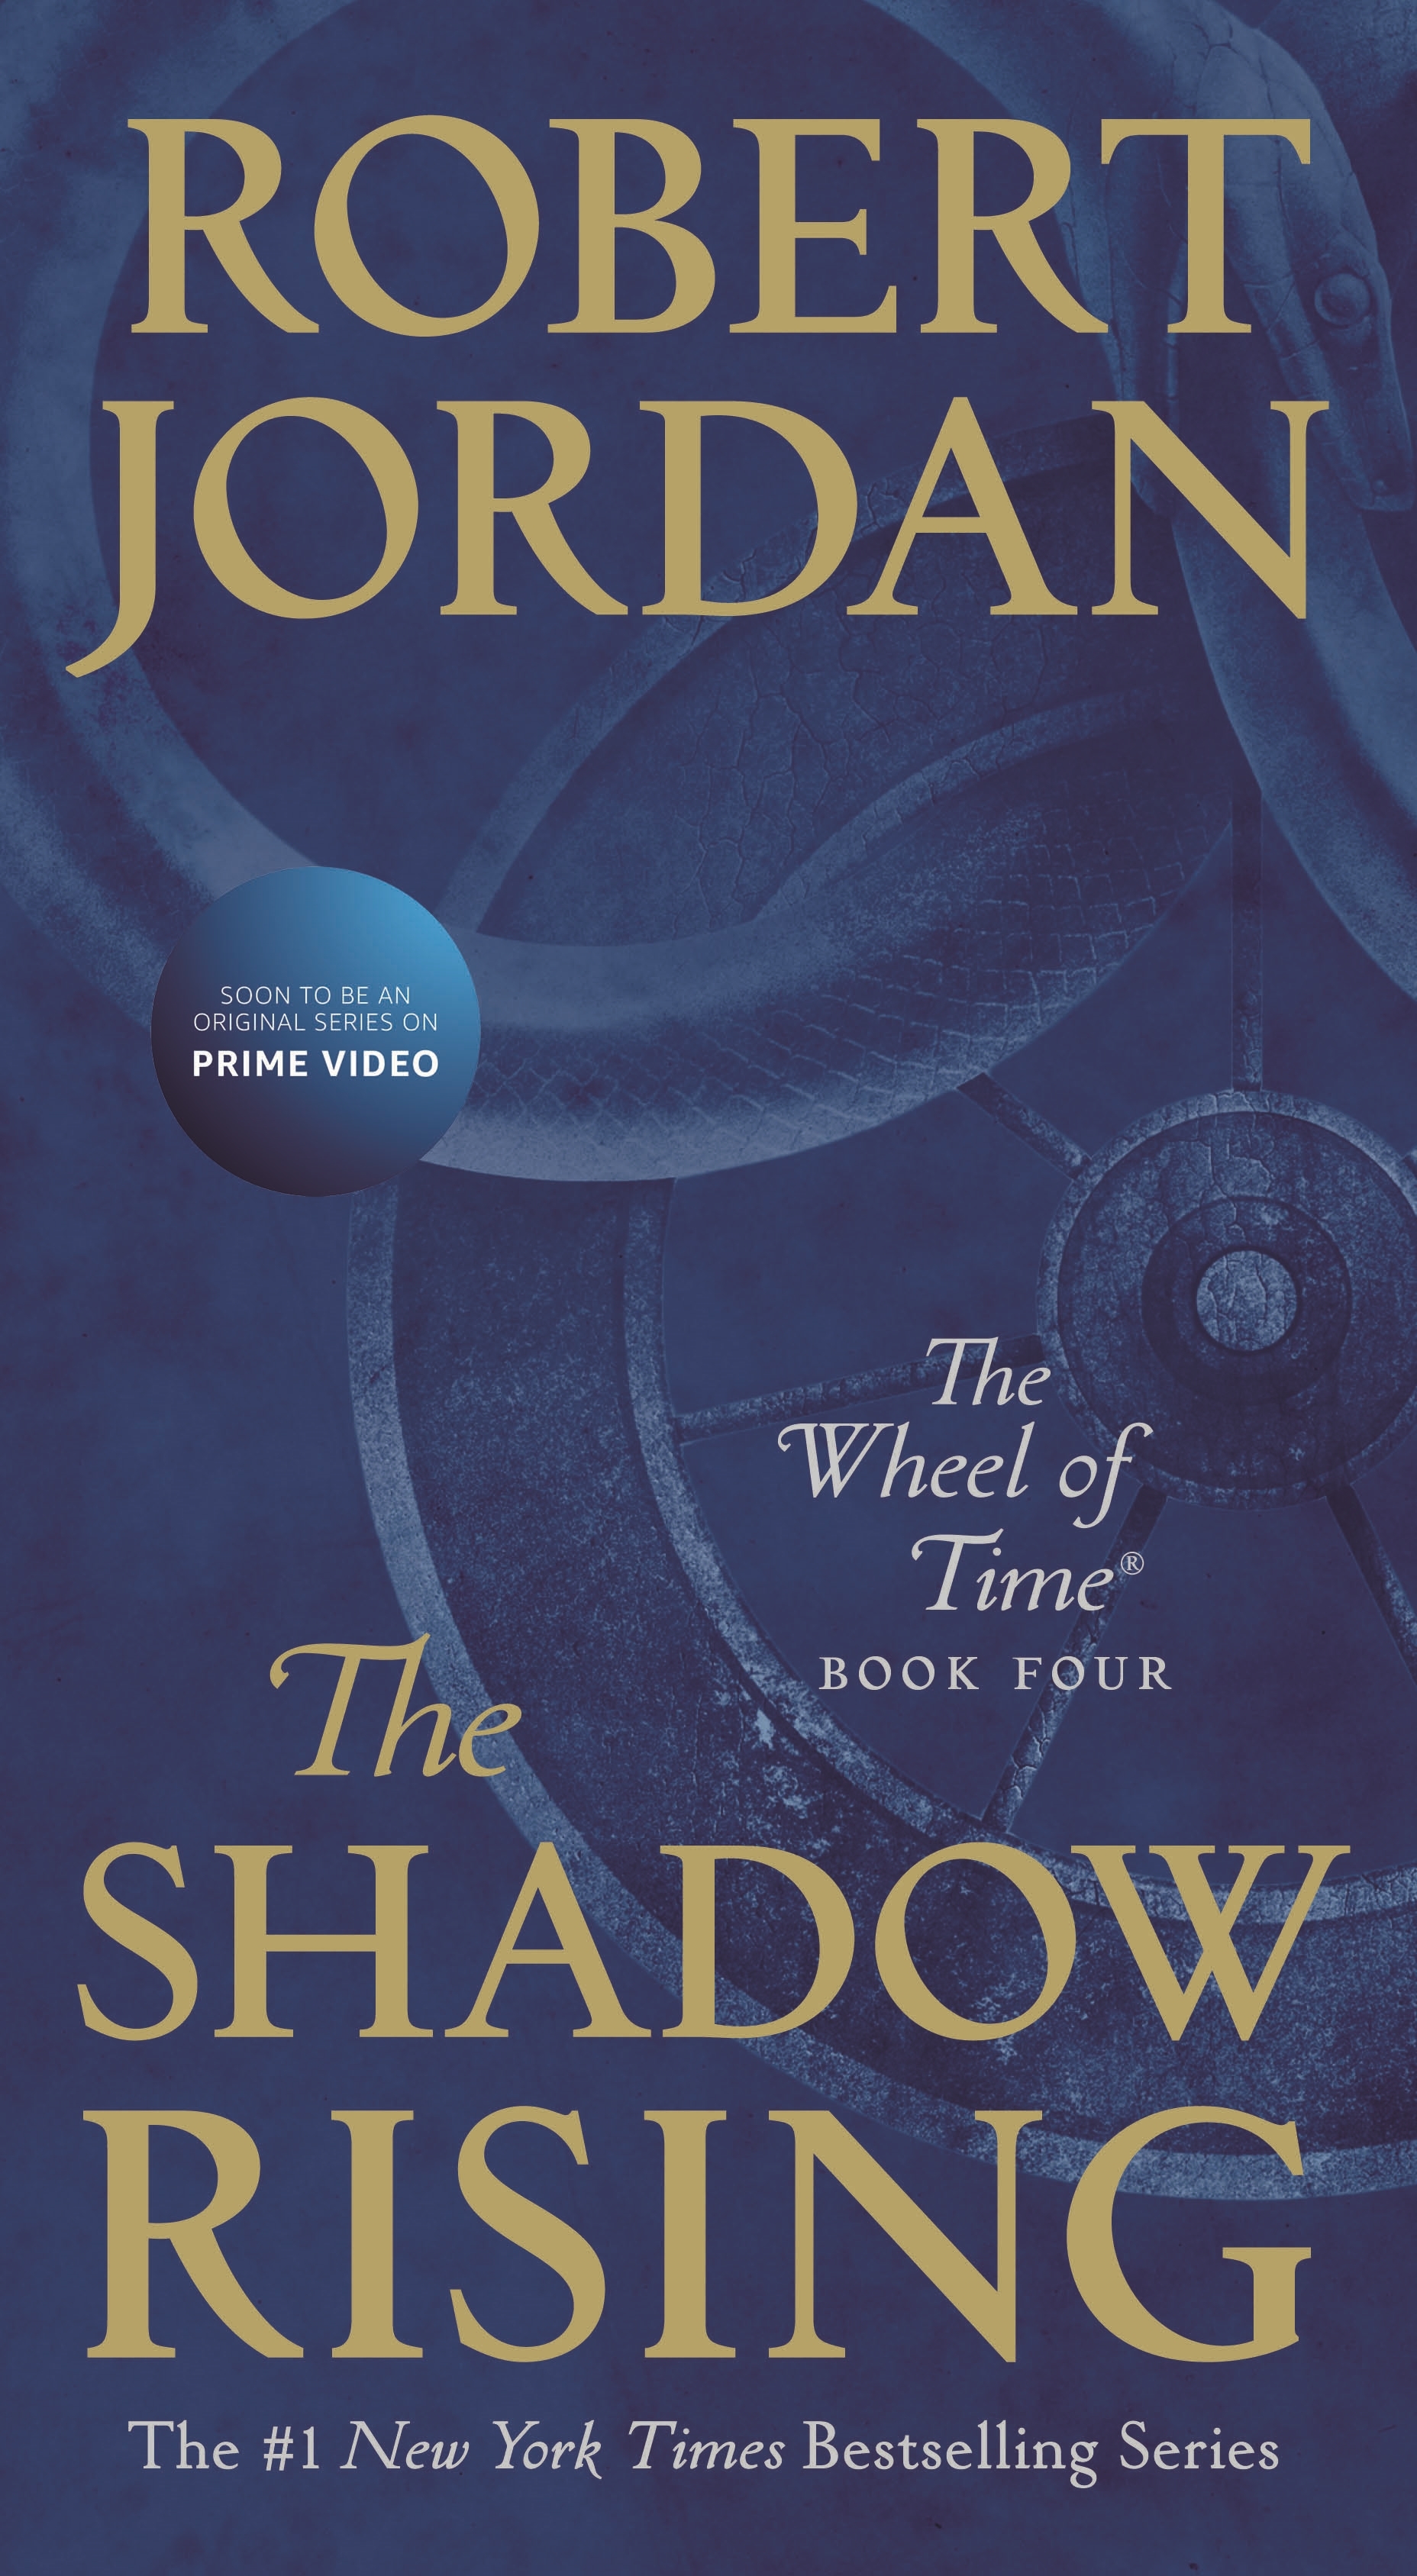 The Shadow Rising : Book Four of 'The Wheel of Time' by Robert Jordan